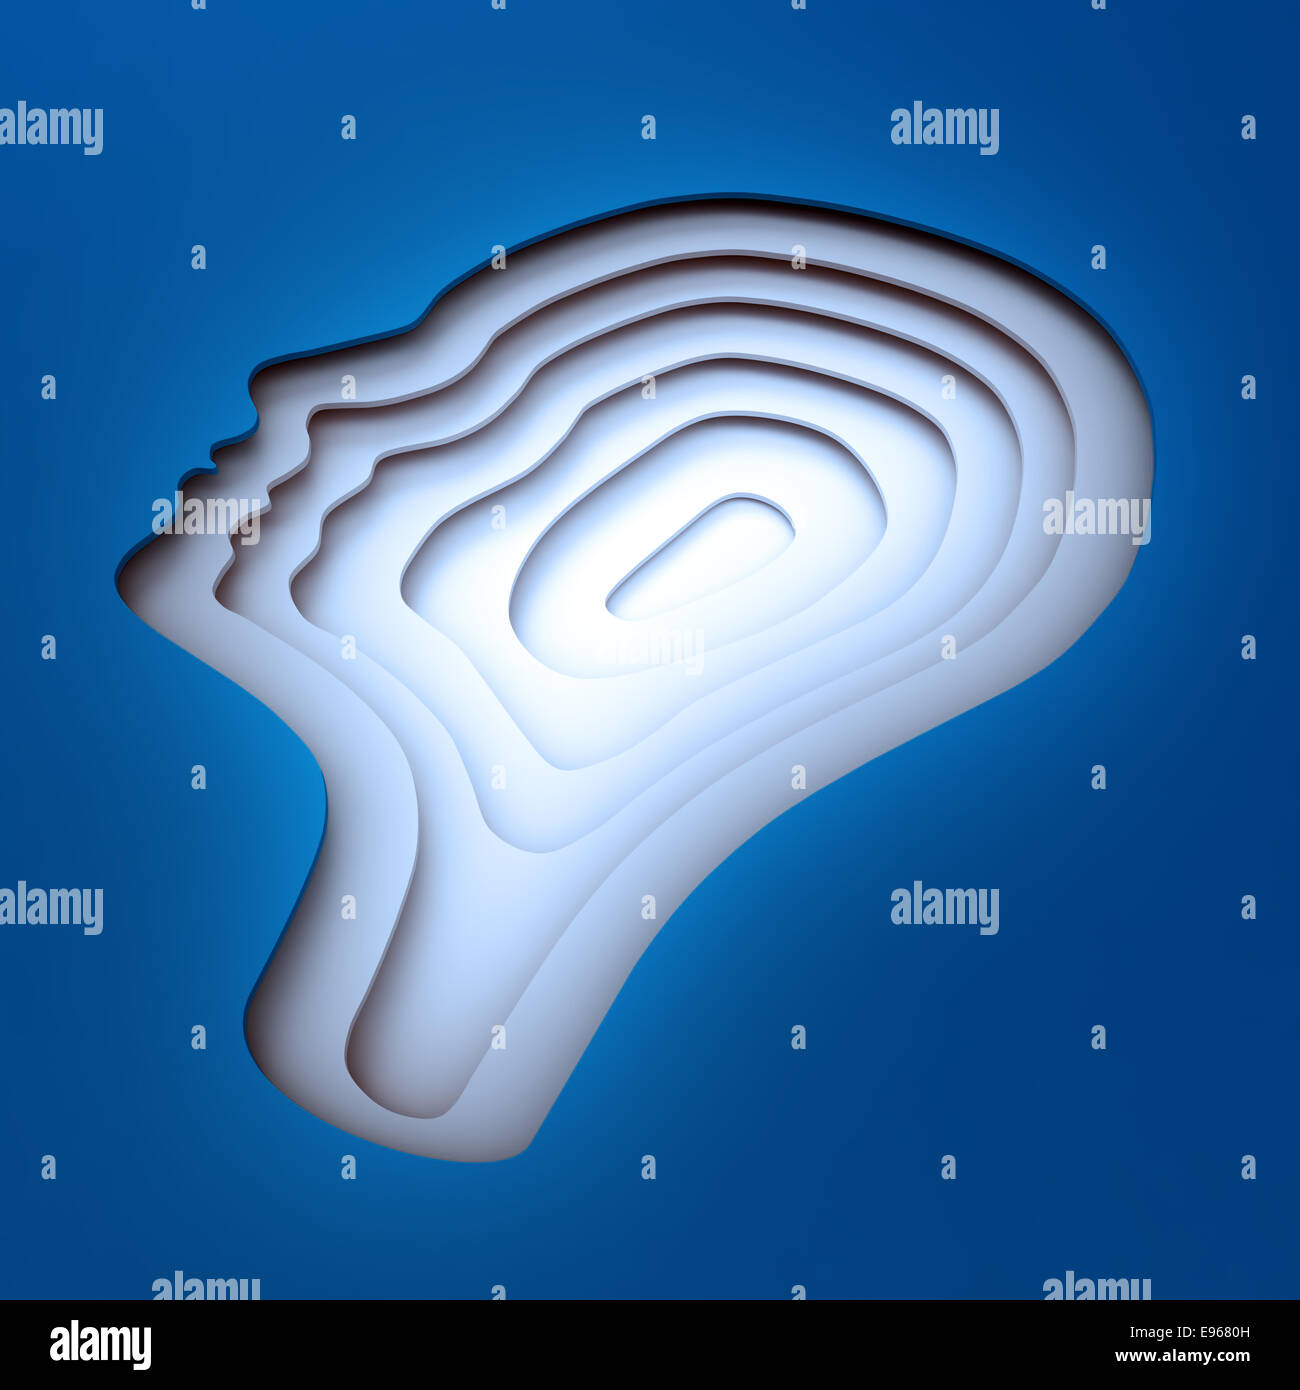 Inside a head silhouette - psychology concept Stock Photo